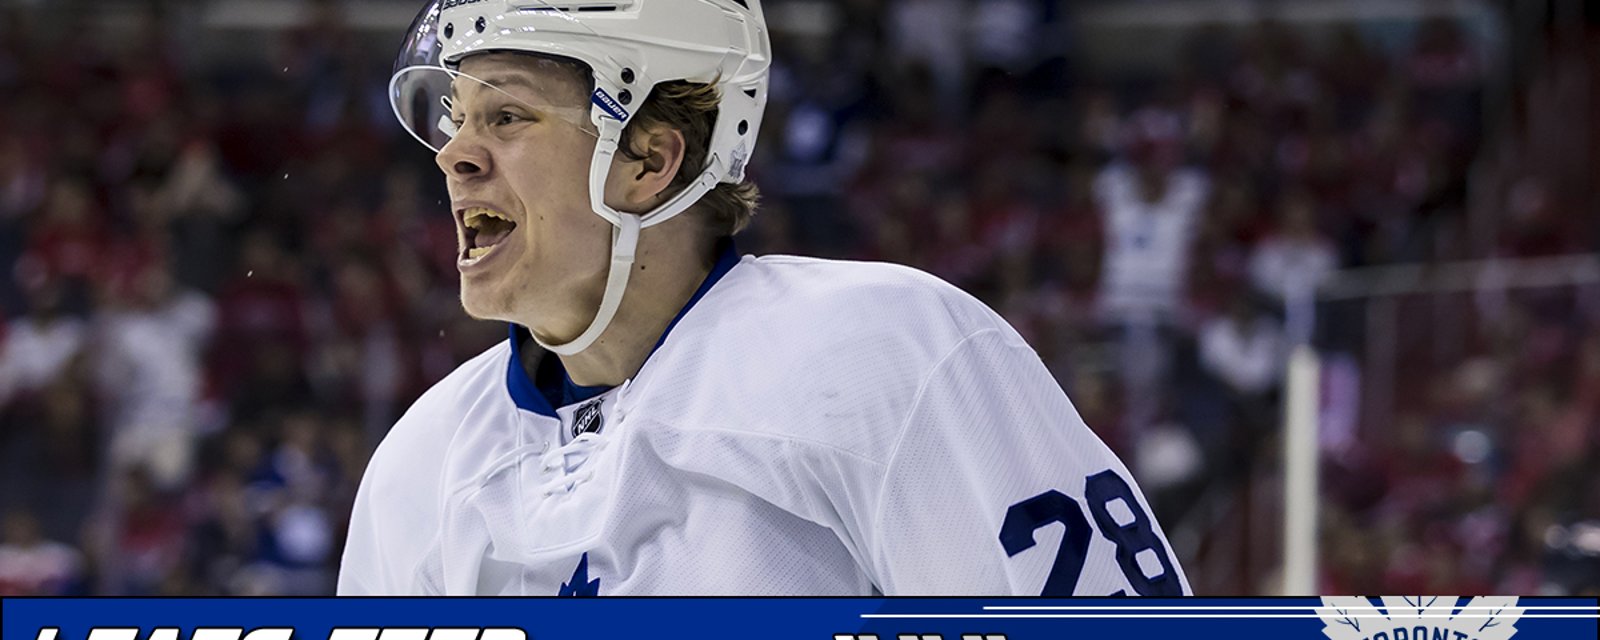 Leafs prospects watch: Kapanen and Johnsson are still on fire in the AHL!